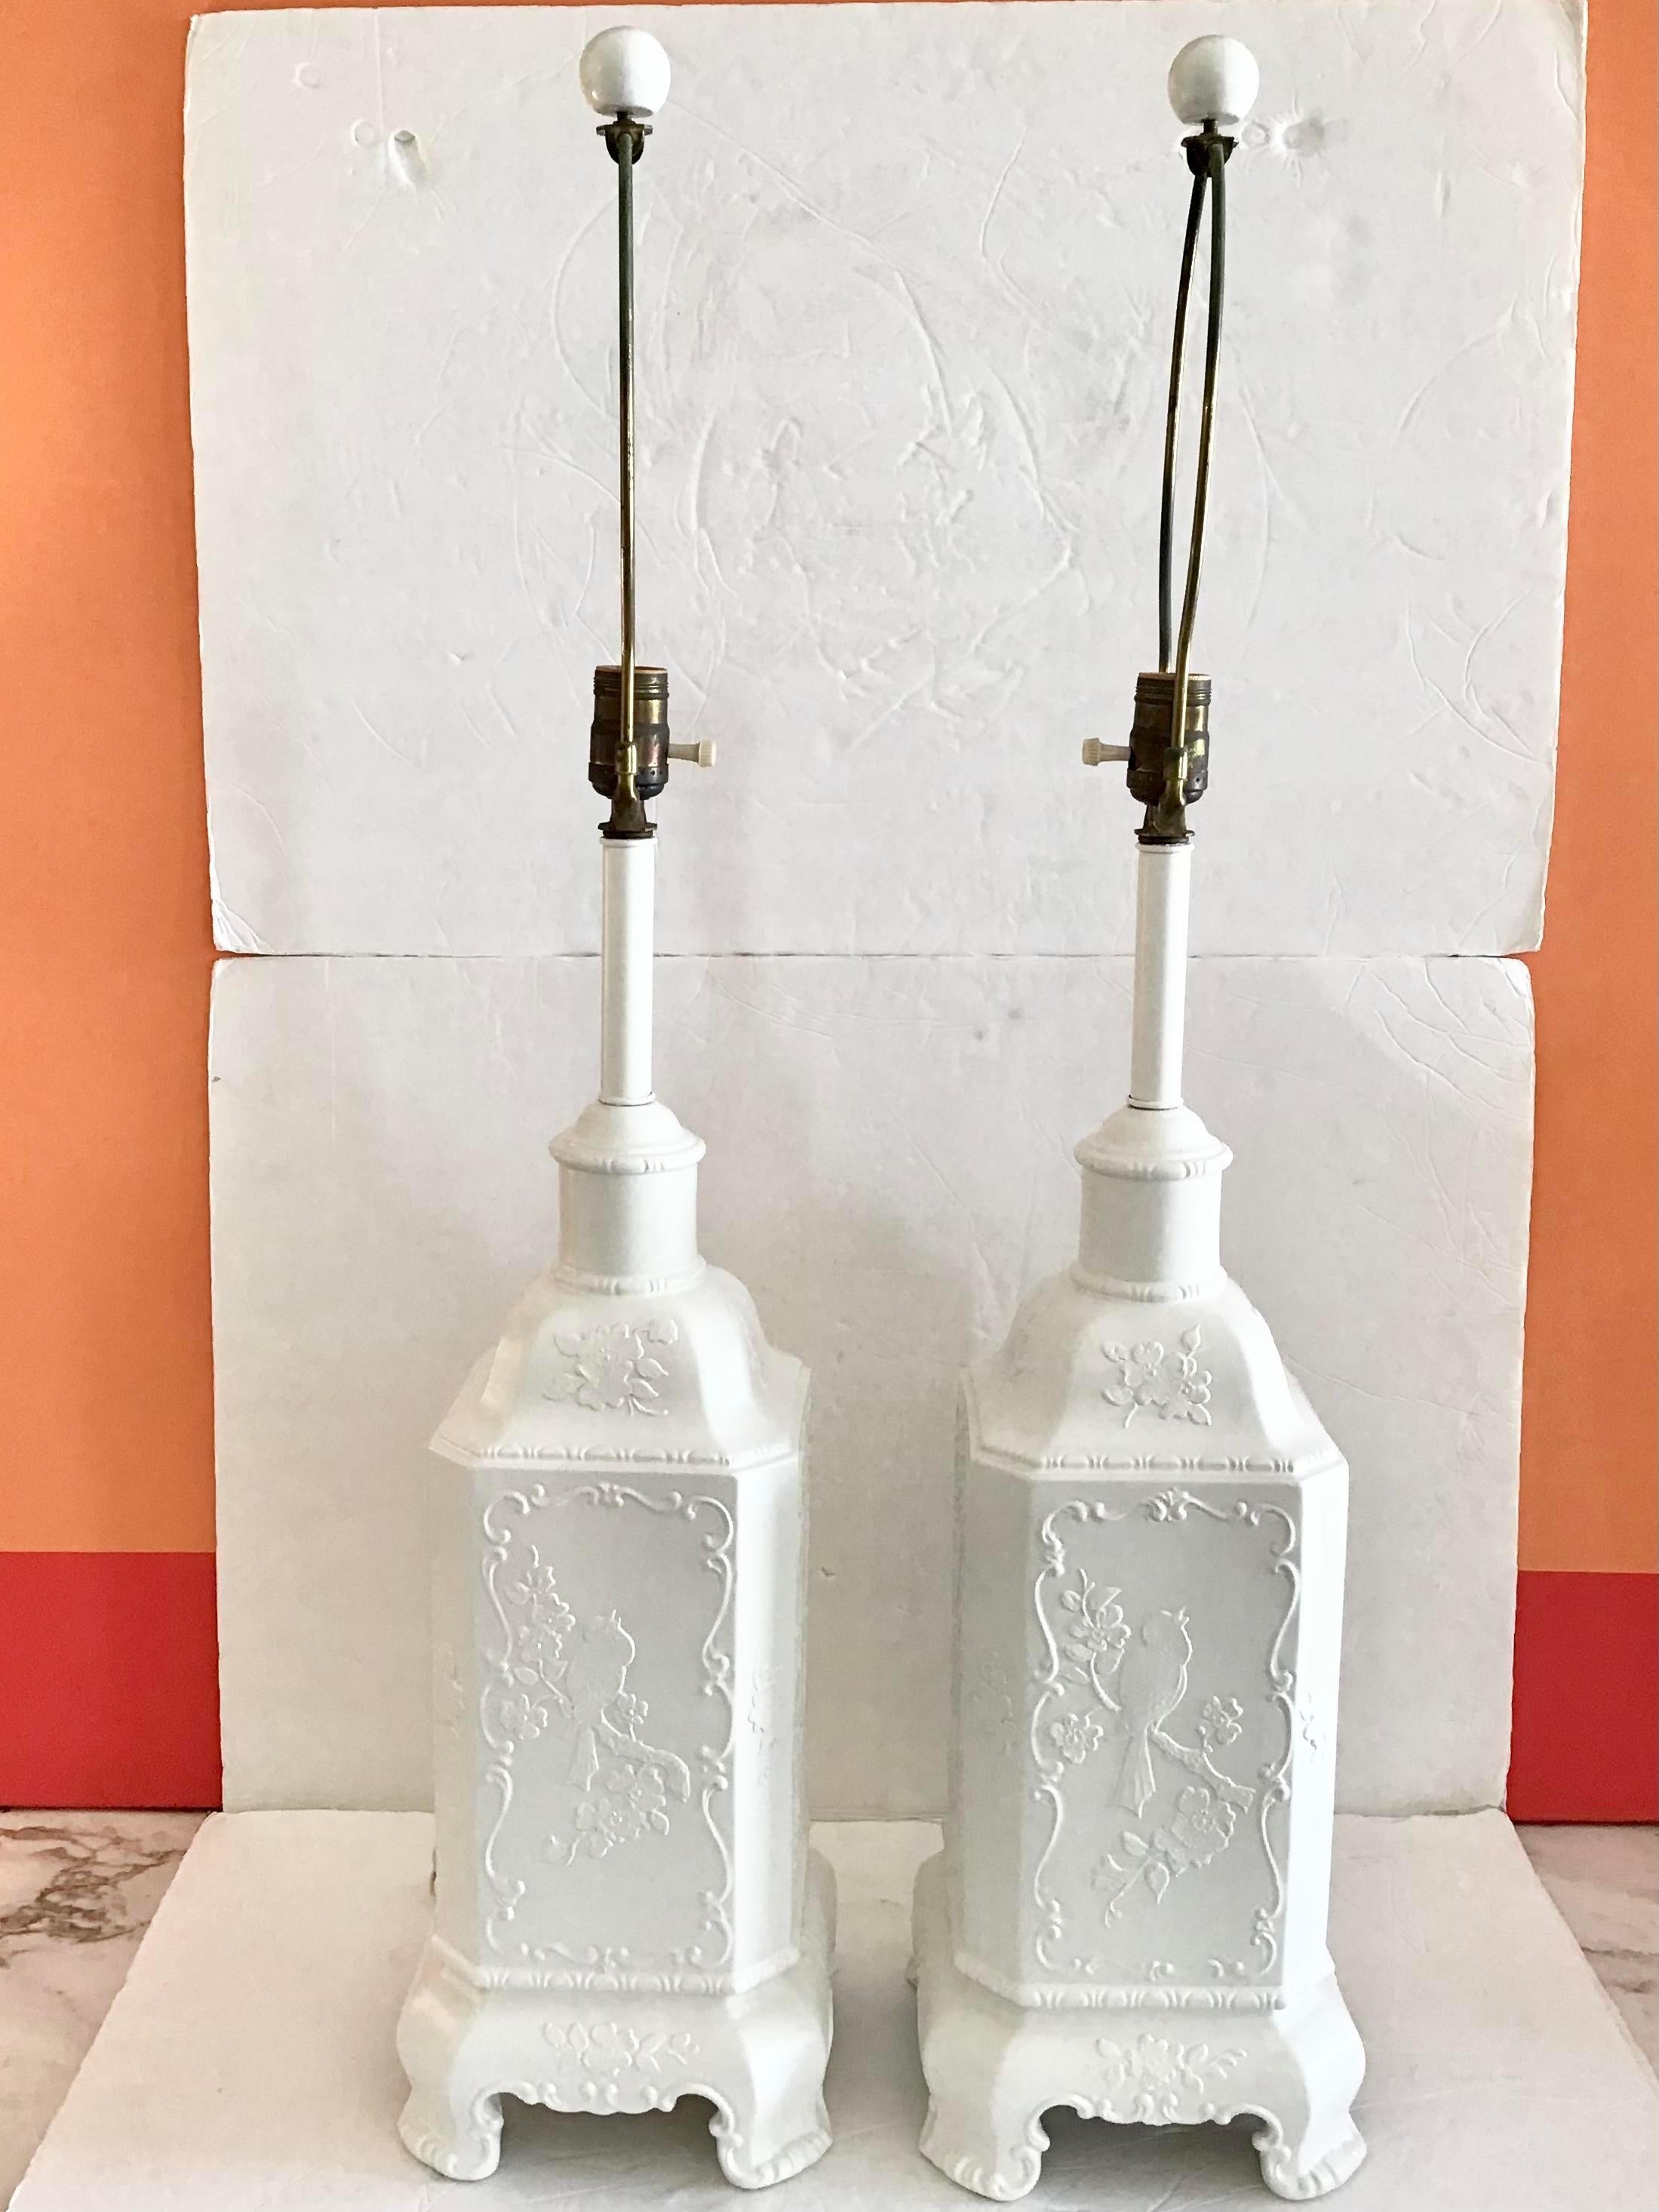 Mid-20th Century chinoiserie Asian Ceramic Table Lamps Freshly Lacquered White, a Pair For Sale